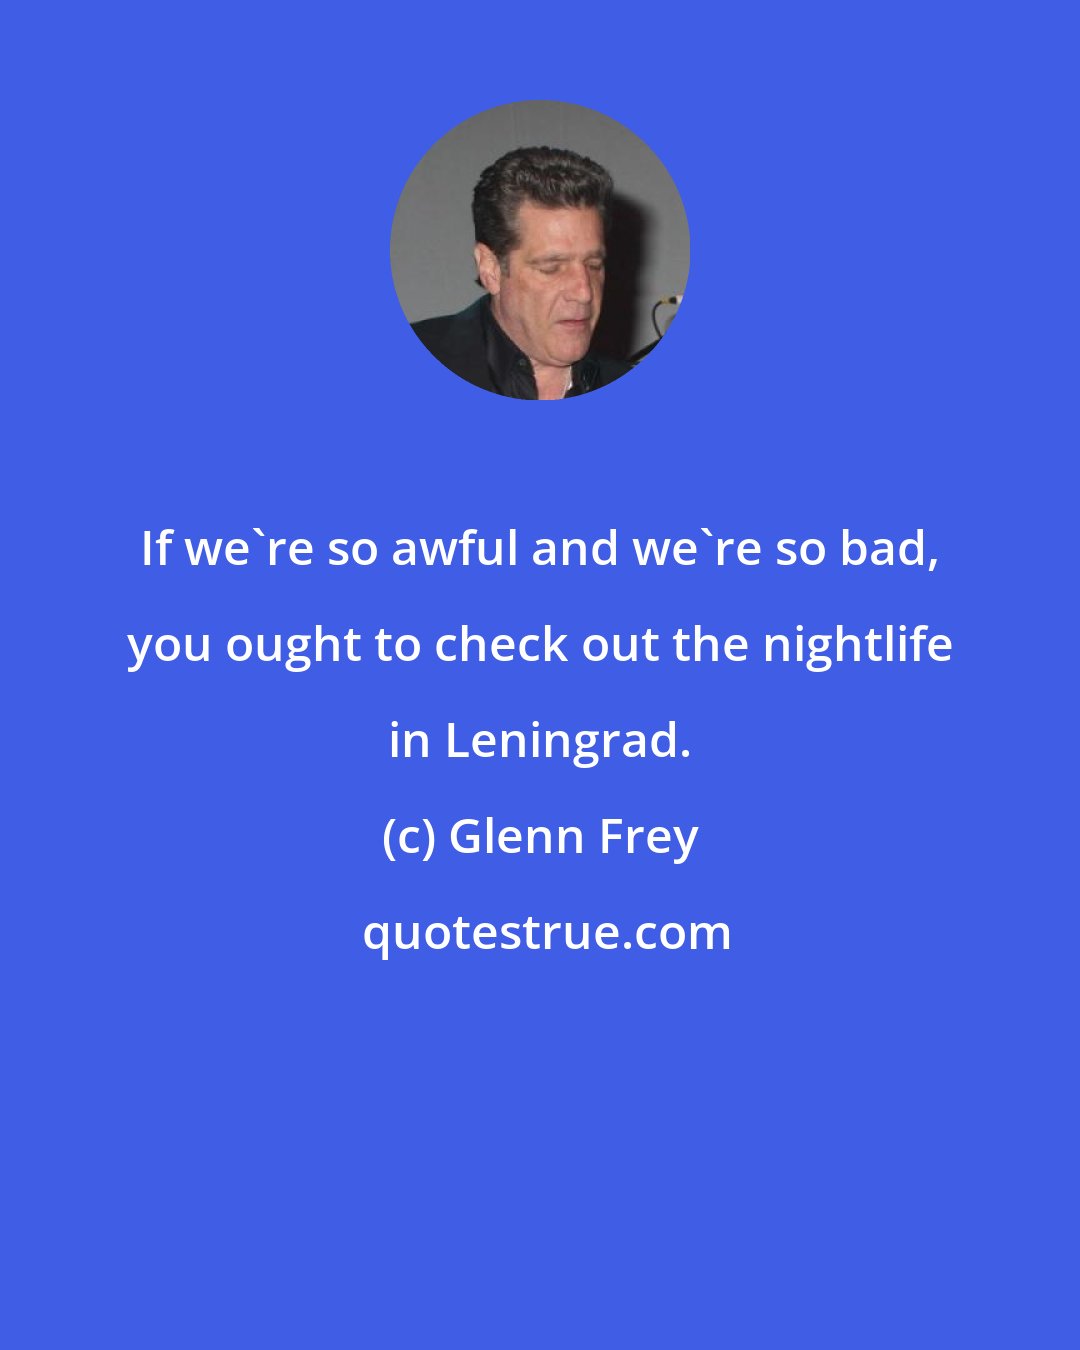 Glenn Frey: If we're so awful and we're so bad, you ought to check out the nightlife in Leningrad.